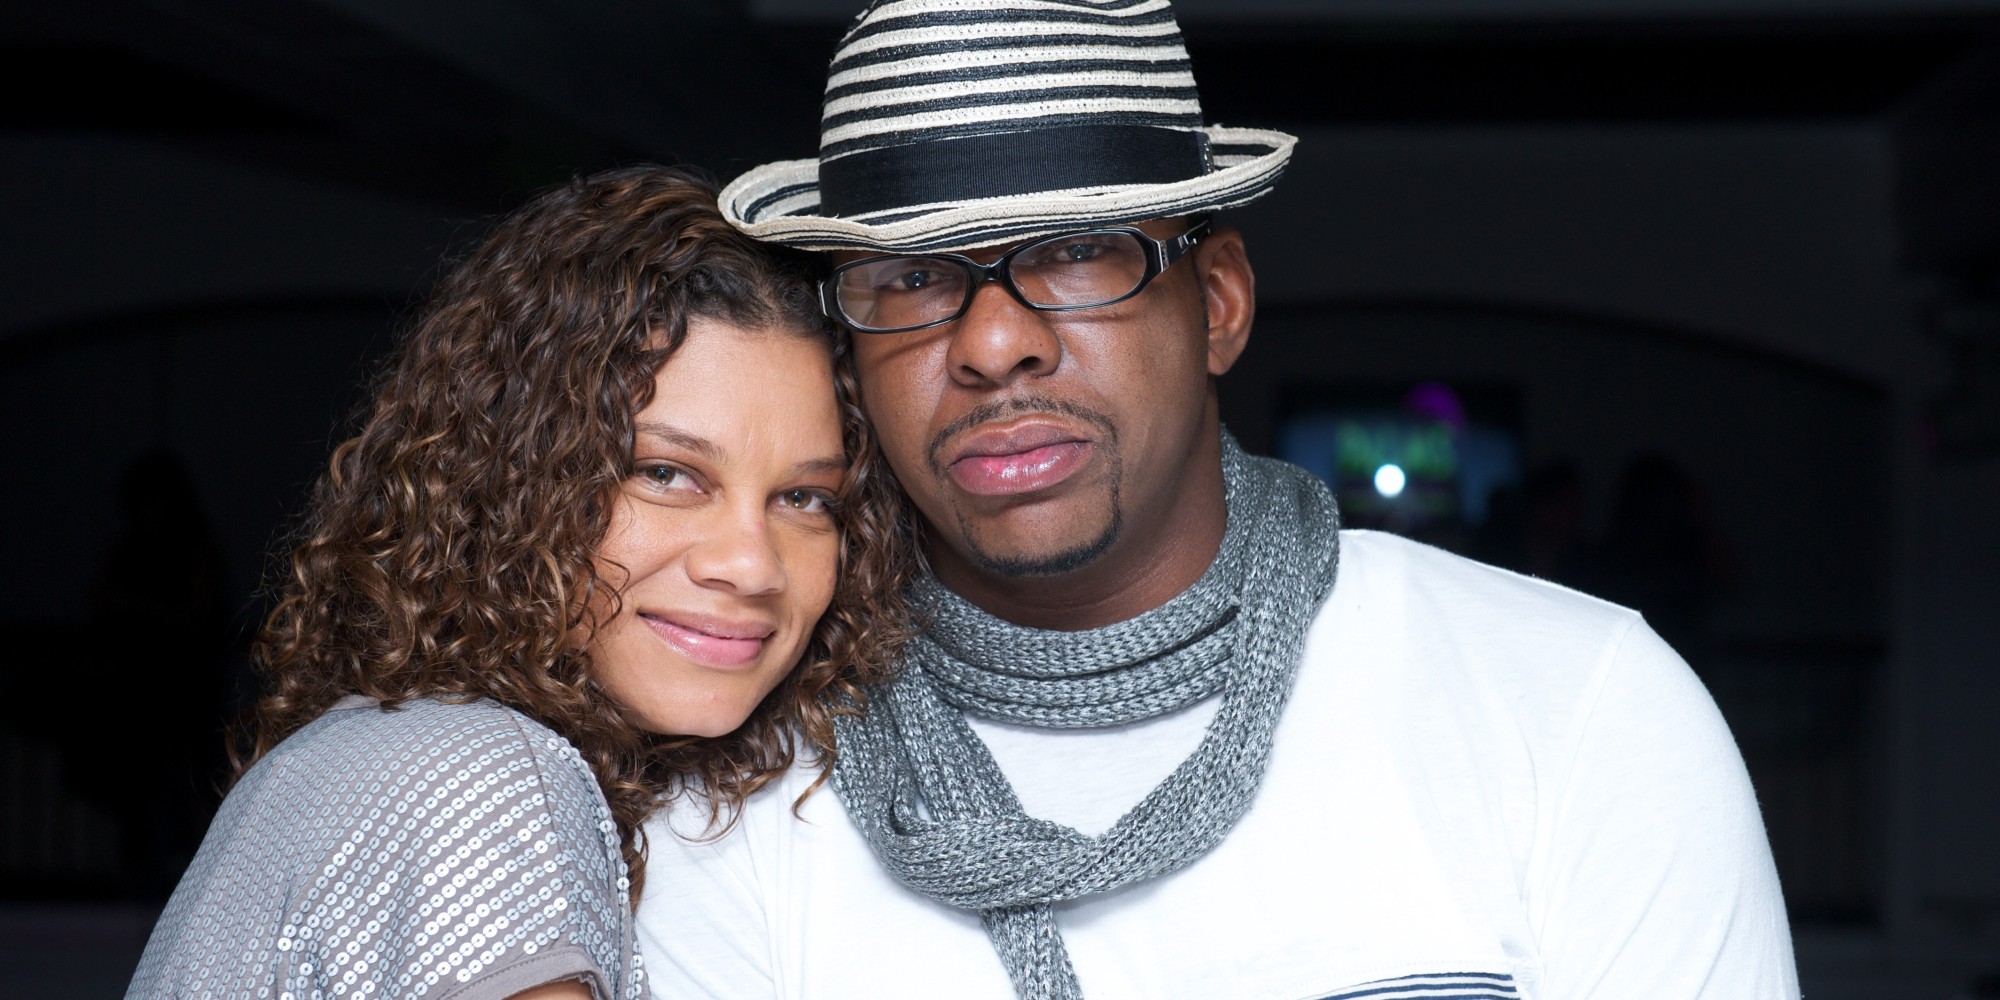 Bobby Brown's Wife Alicia Etheredge Is Pregnant, Expecting His Sixth